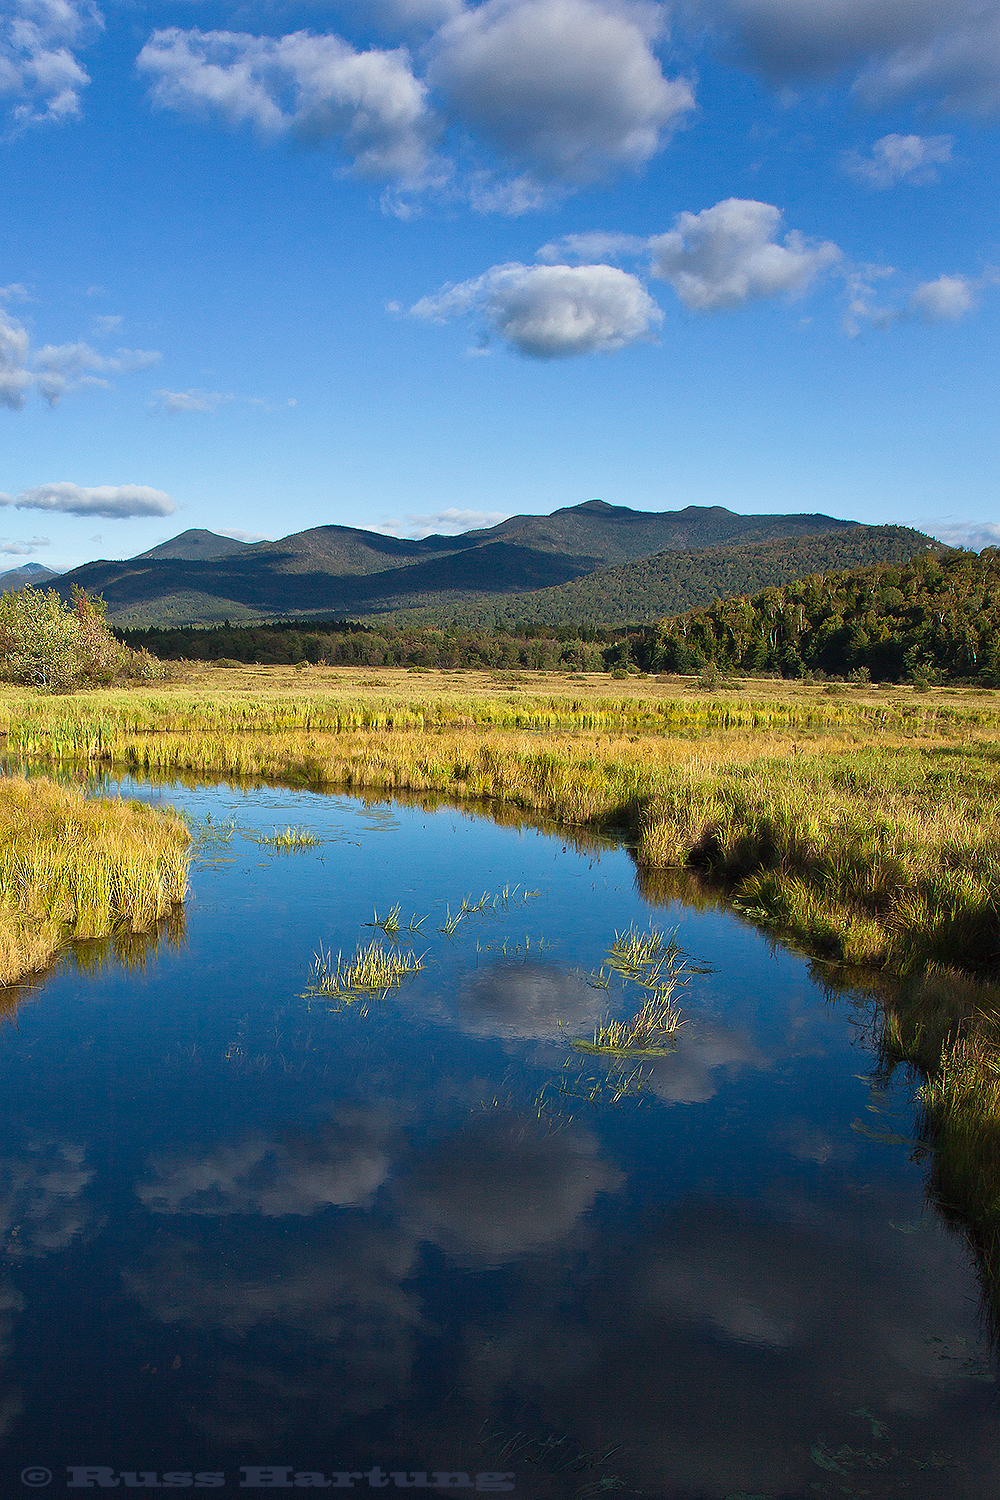 Late summer afternoon near Saranac Lake. Looking towards McKenzie Mountain and Whiteface Mountain.  